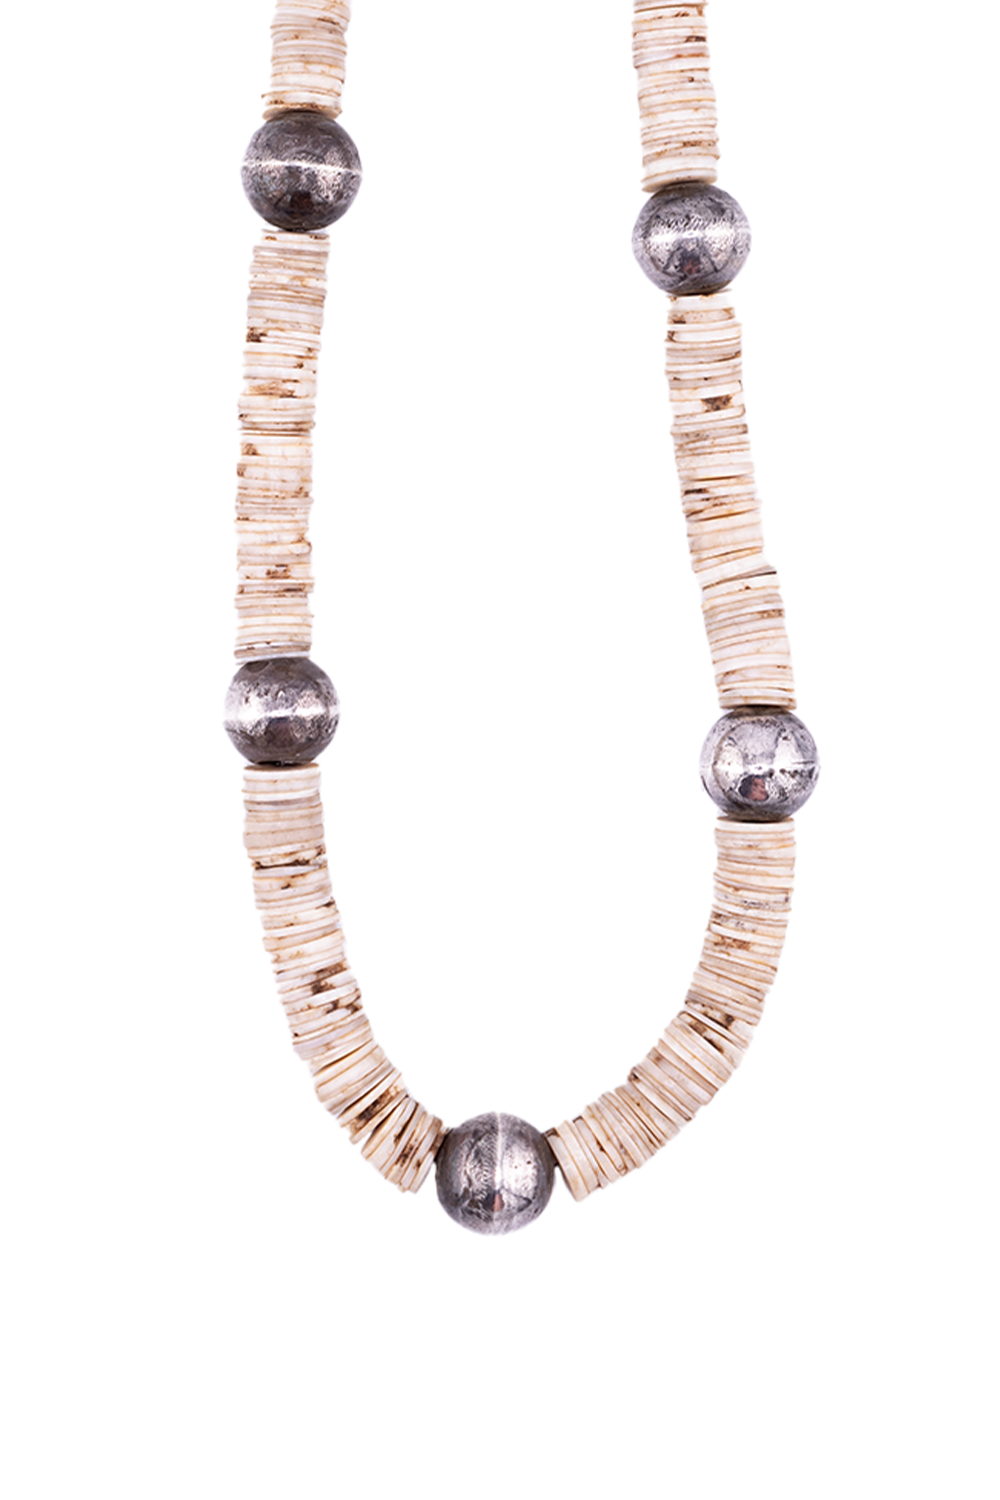 Old Shell Heishi Antique Diamond Beads Necklace